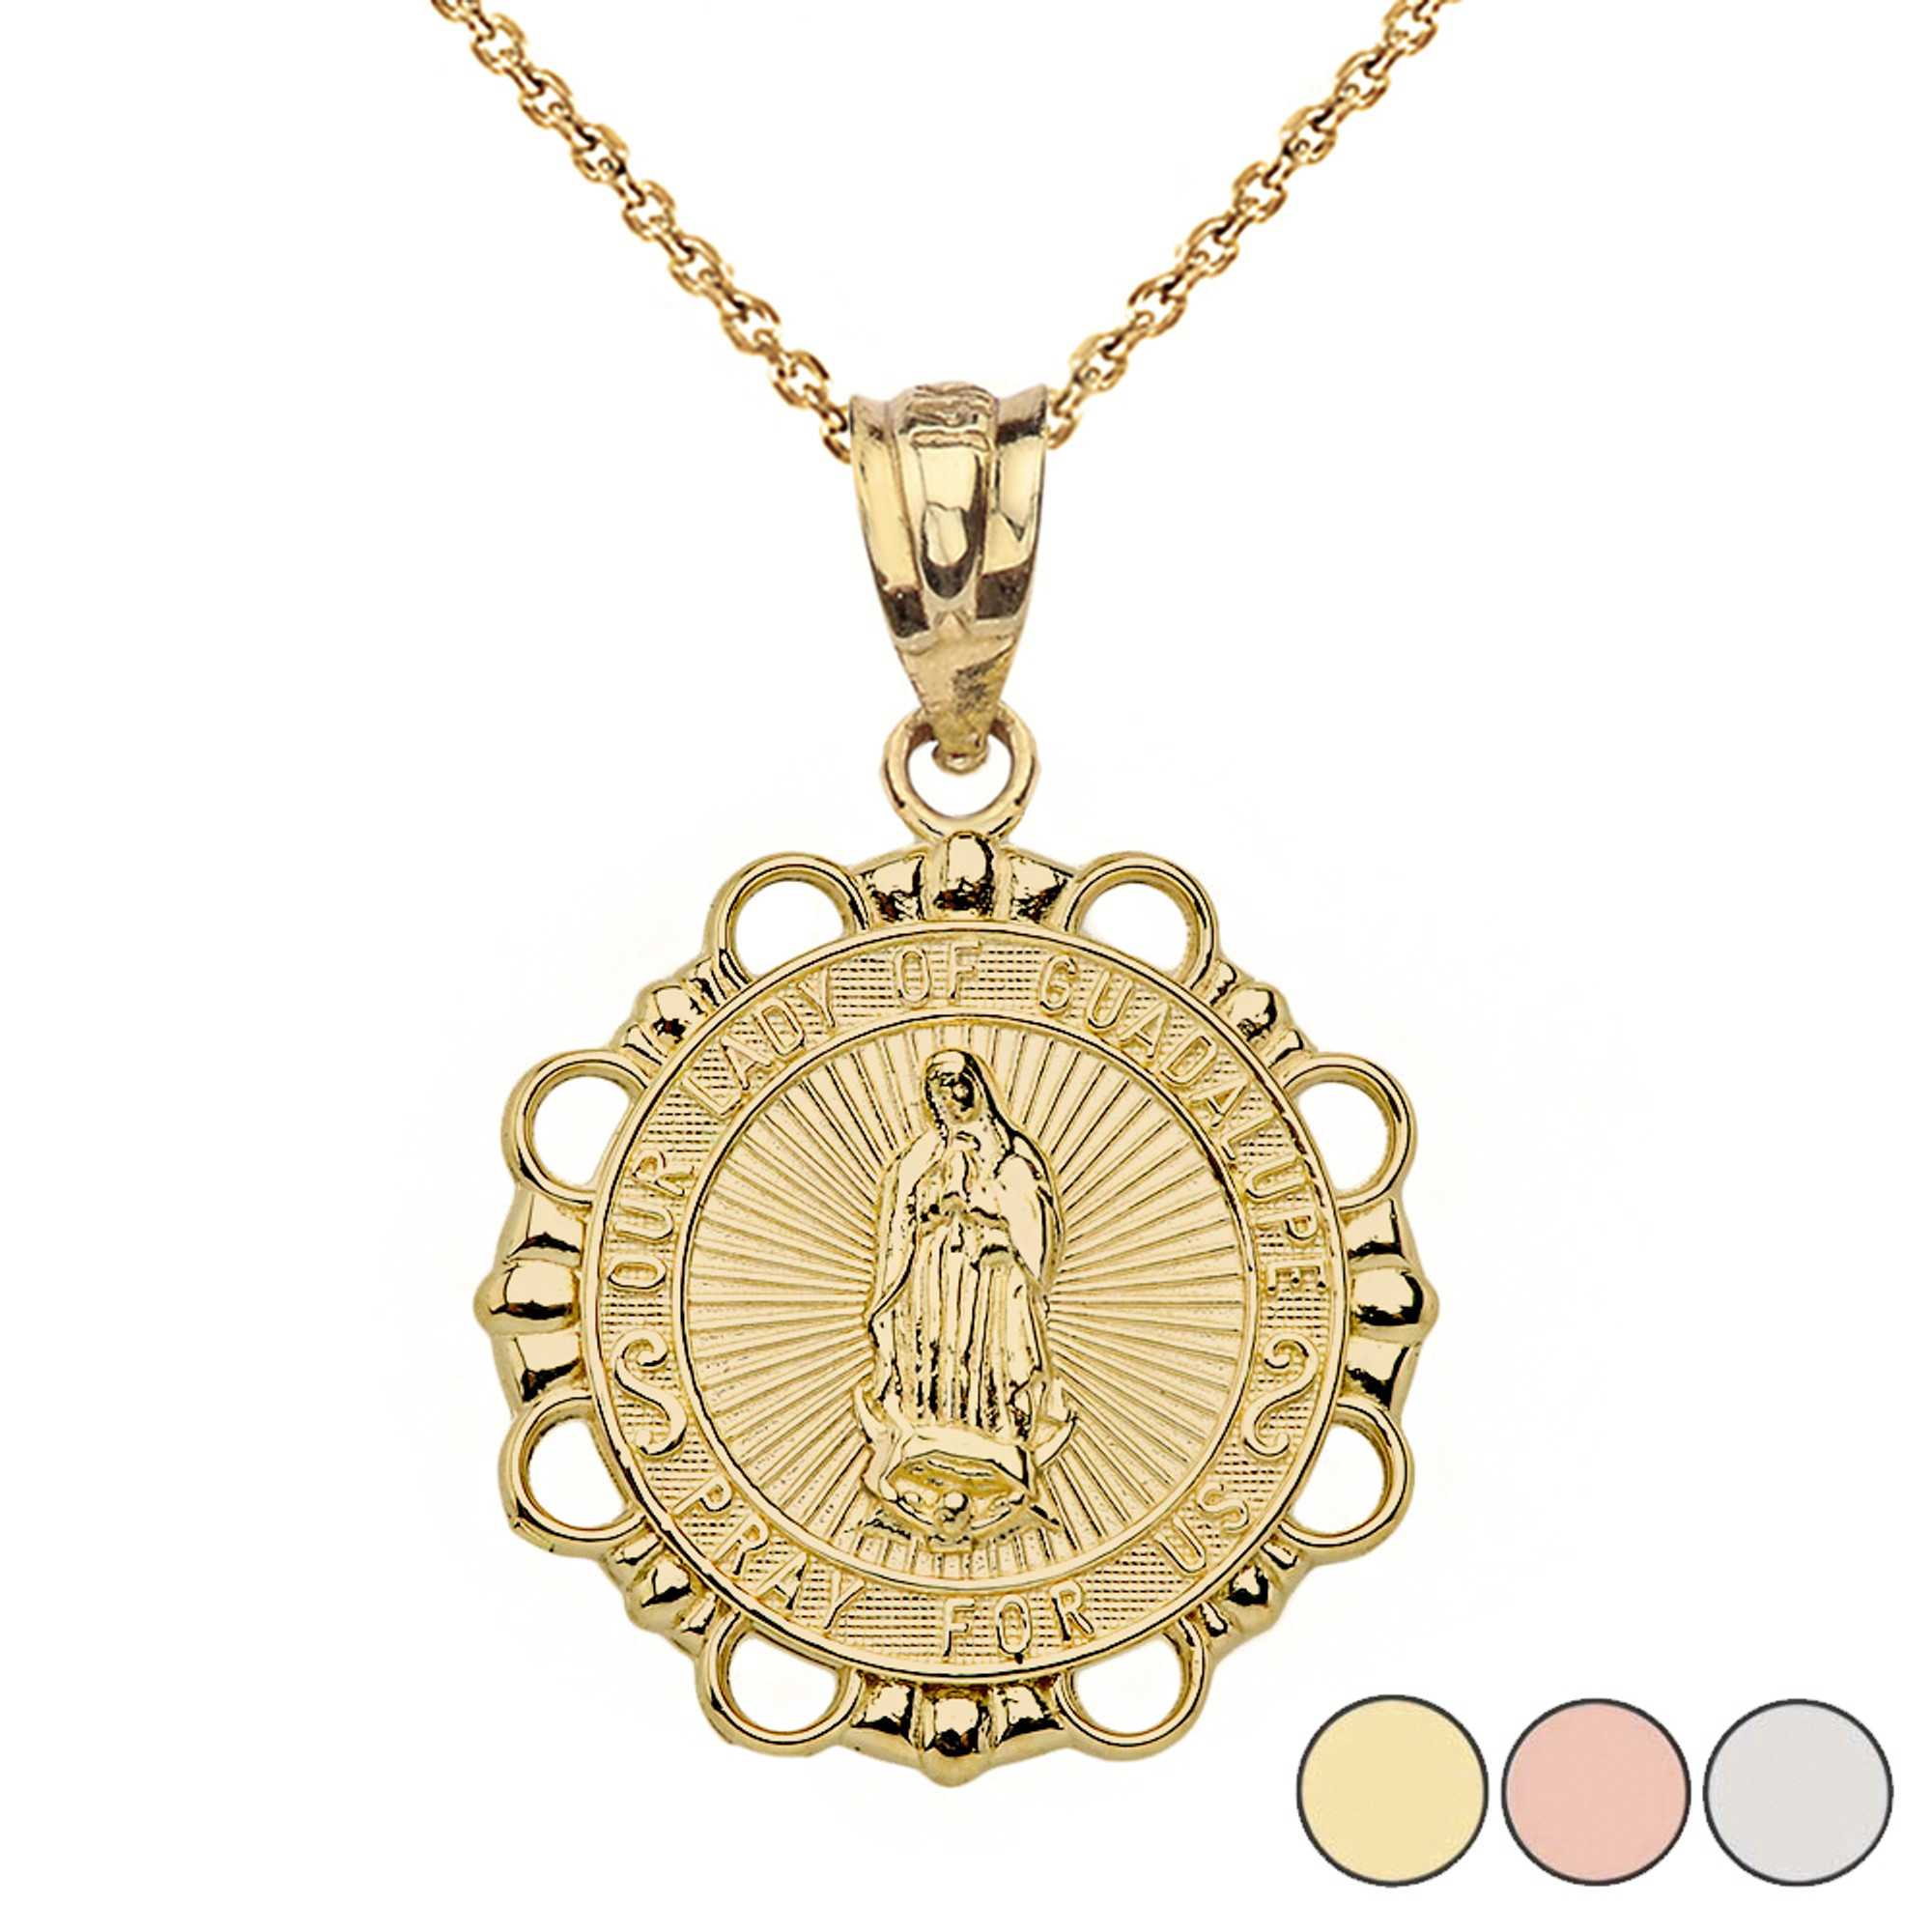 Our Lady Of Guadalupe Necklace | Catch.com.au